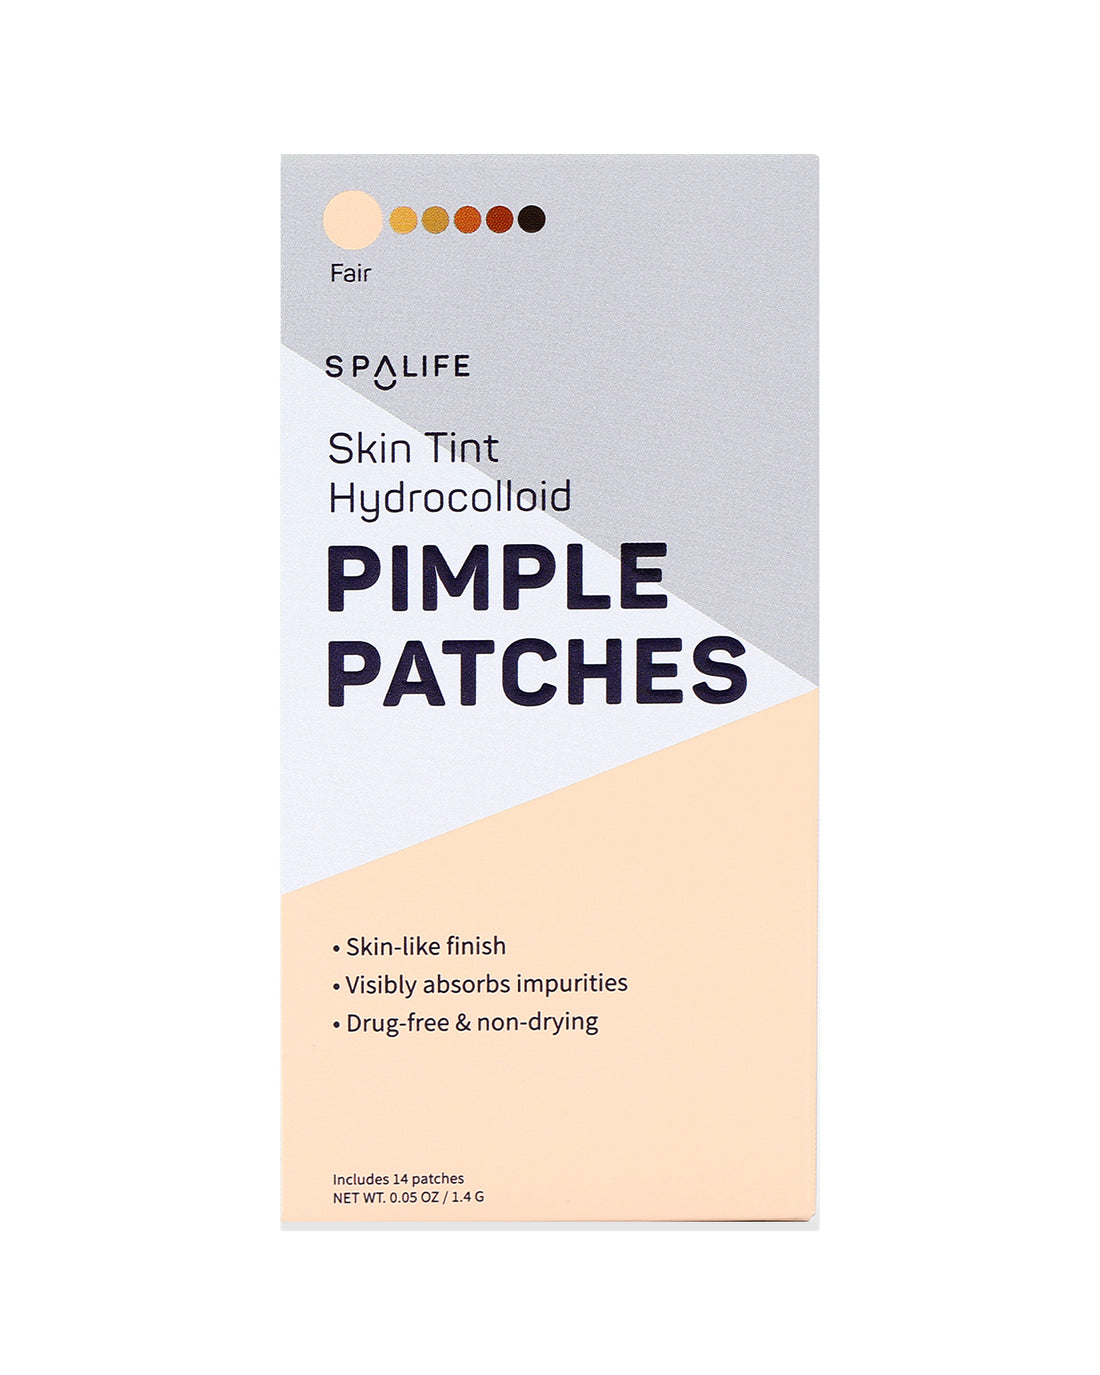 Skin_tint_pimple_patches_packe-833